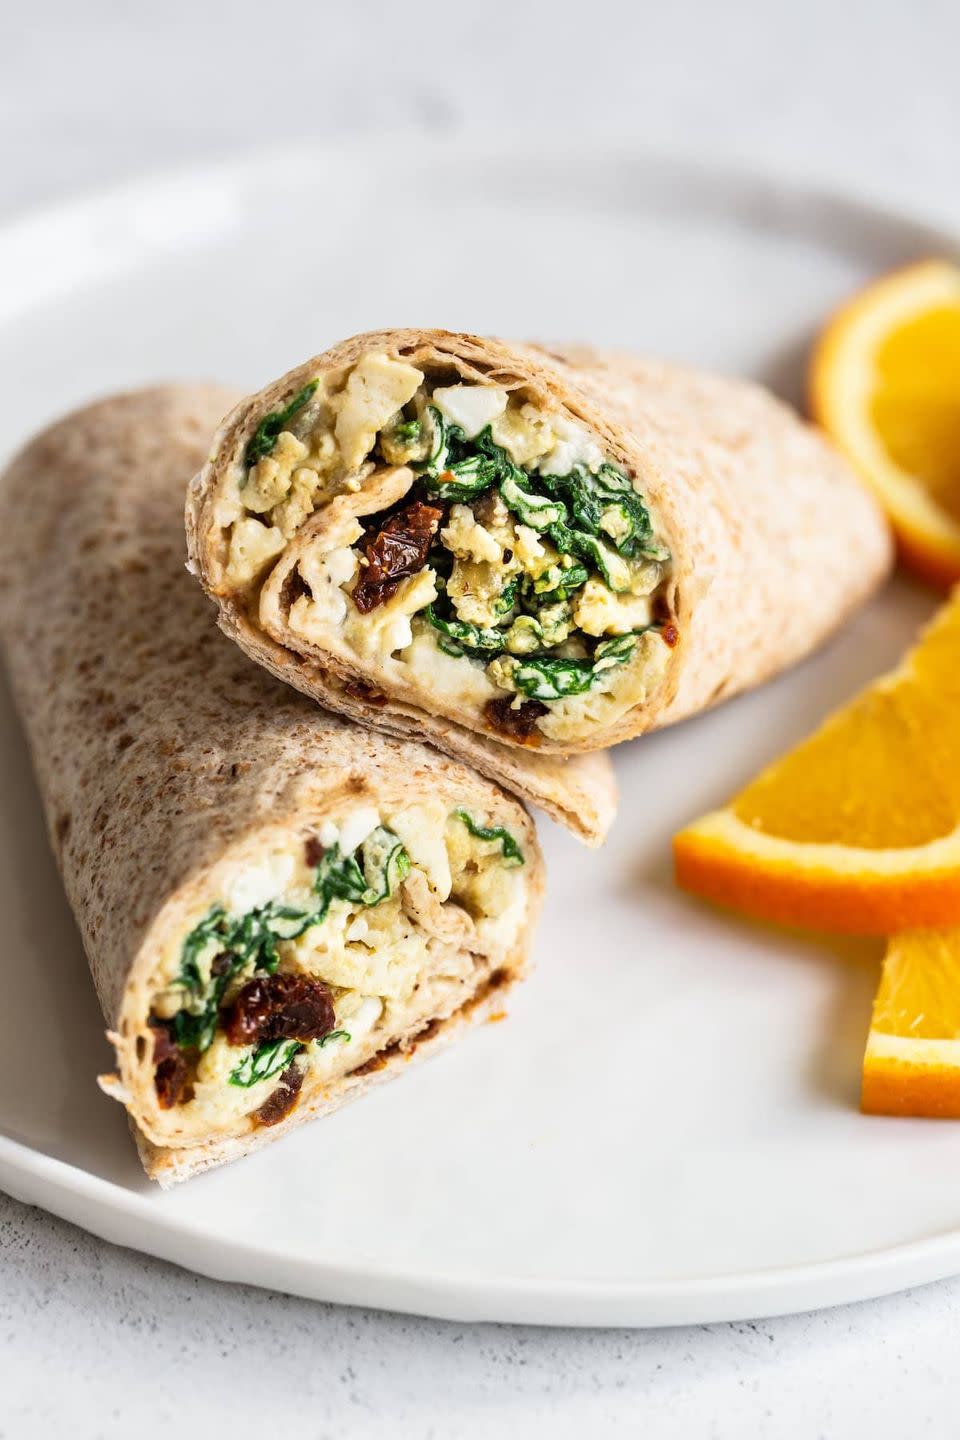 Egg, Spinach, and Feta Breakfast Wrap